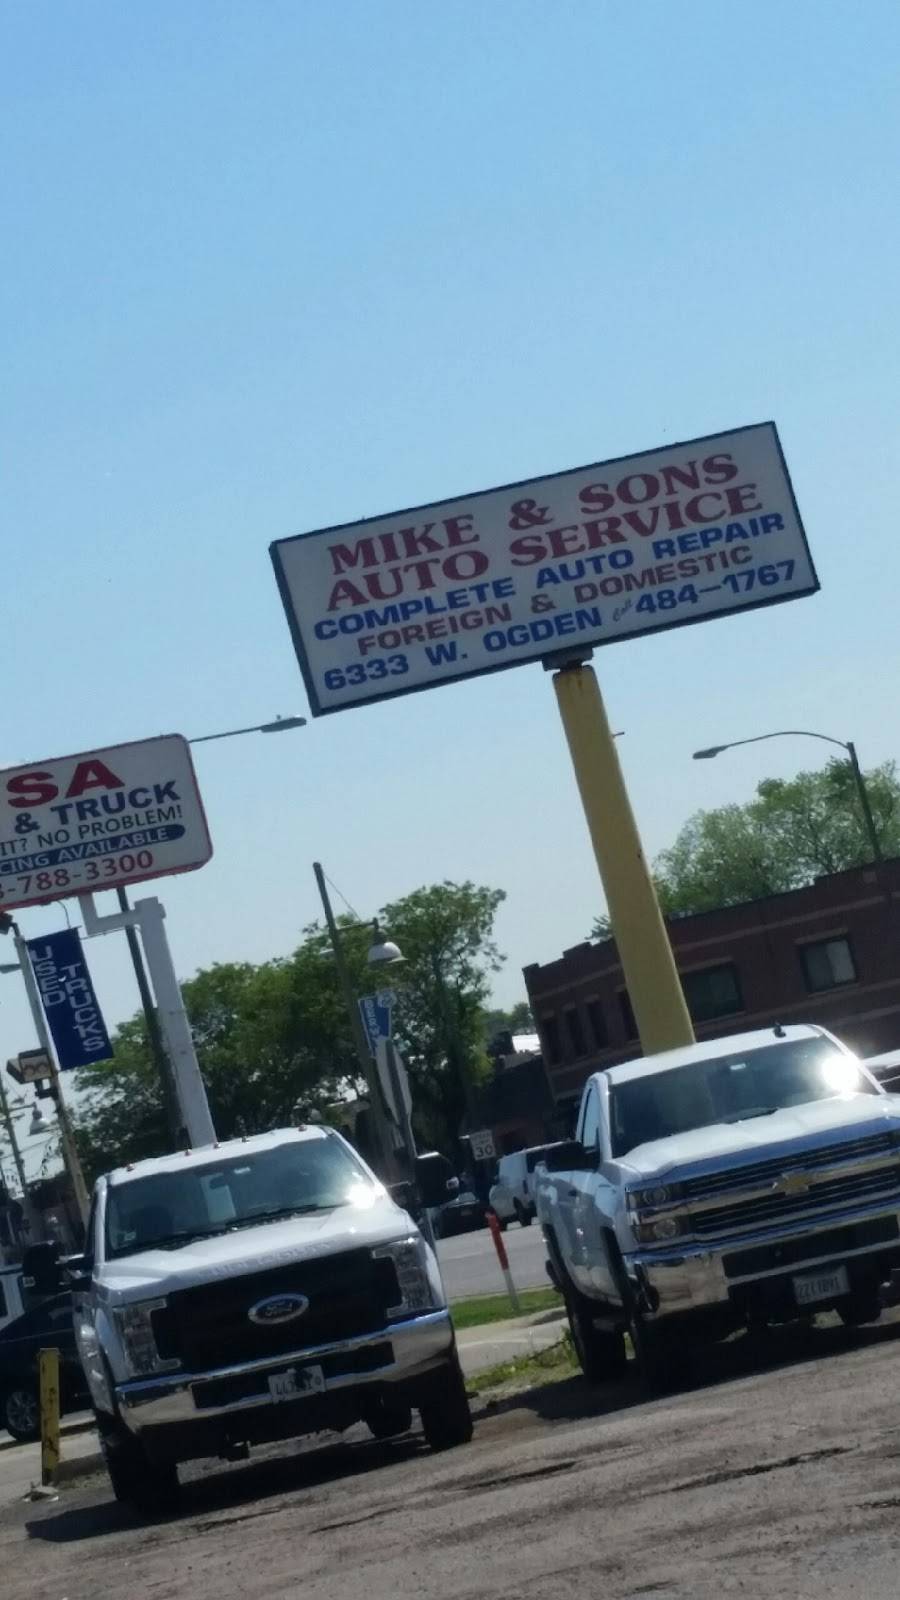 Mike & Sons Auto Services | 6333 Ogden Ave # 1, Berwyn, IL 60402, USA | Phone: (708) 484-1767